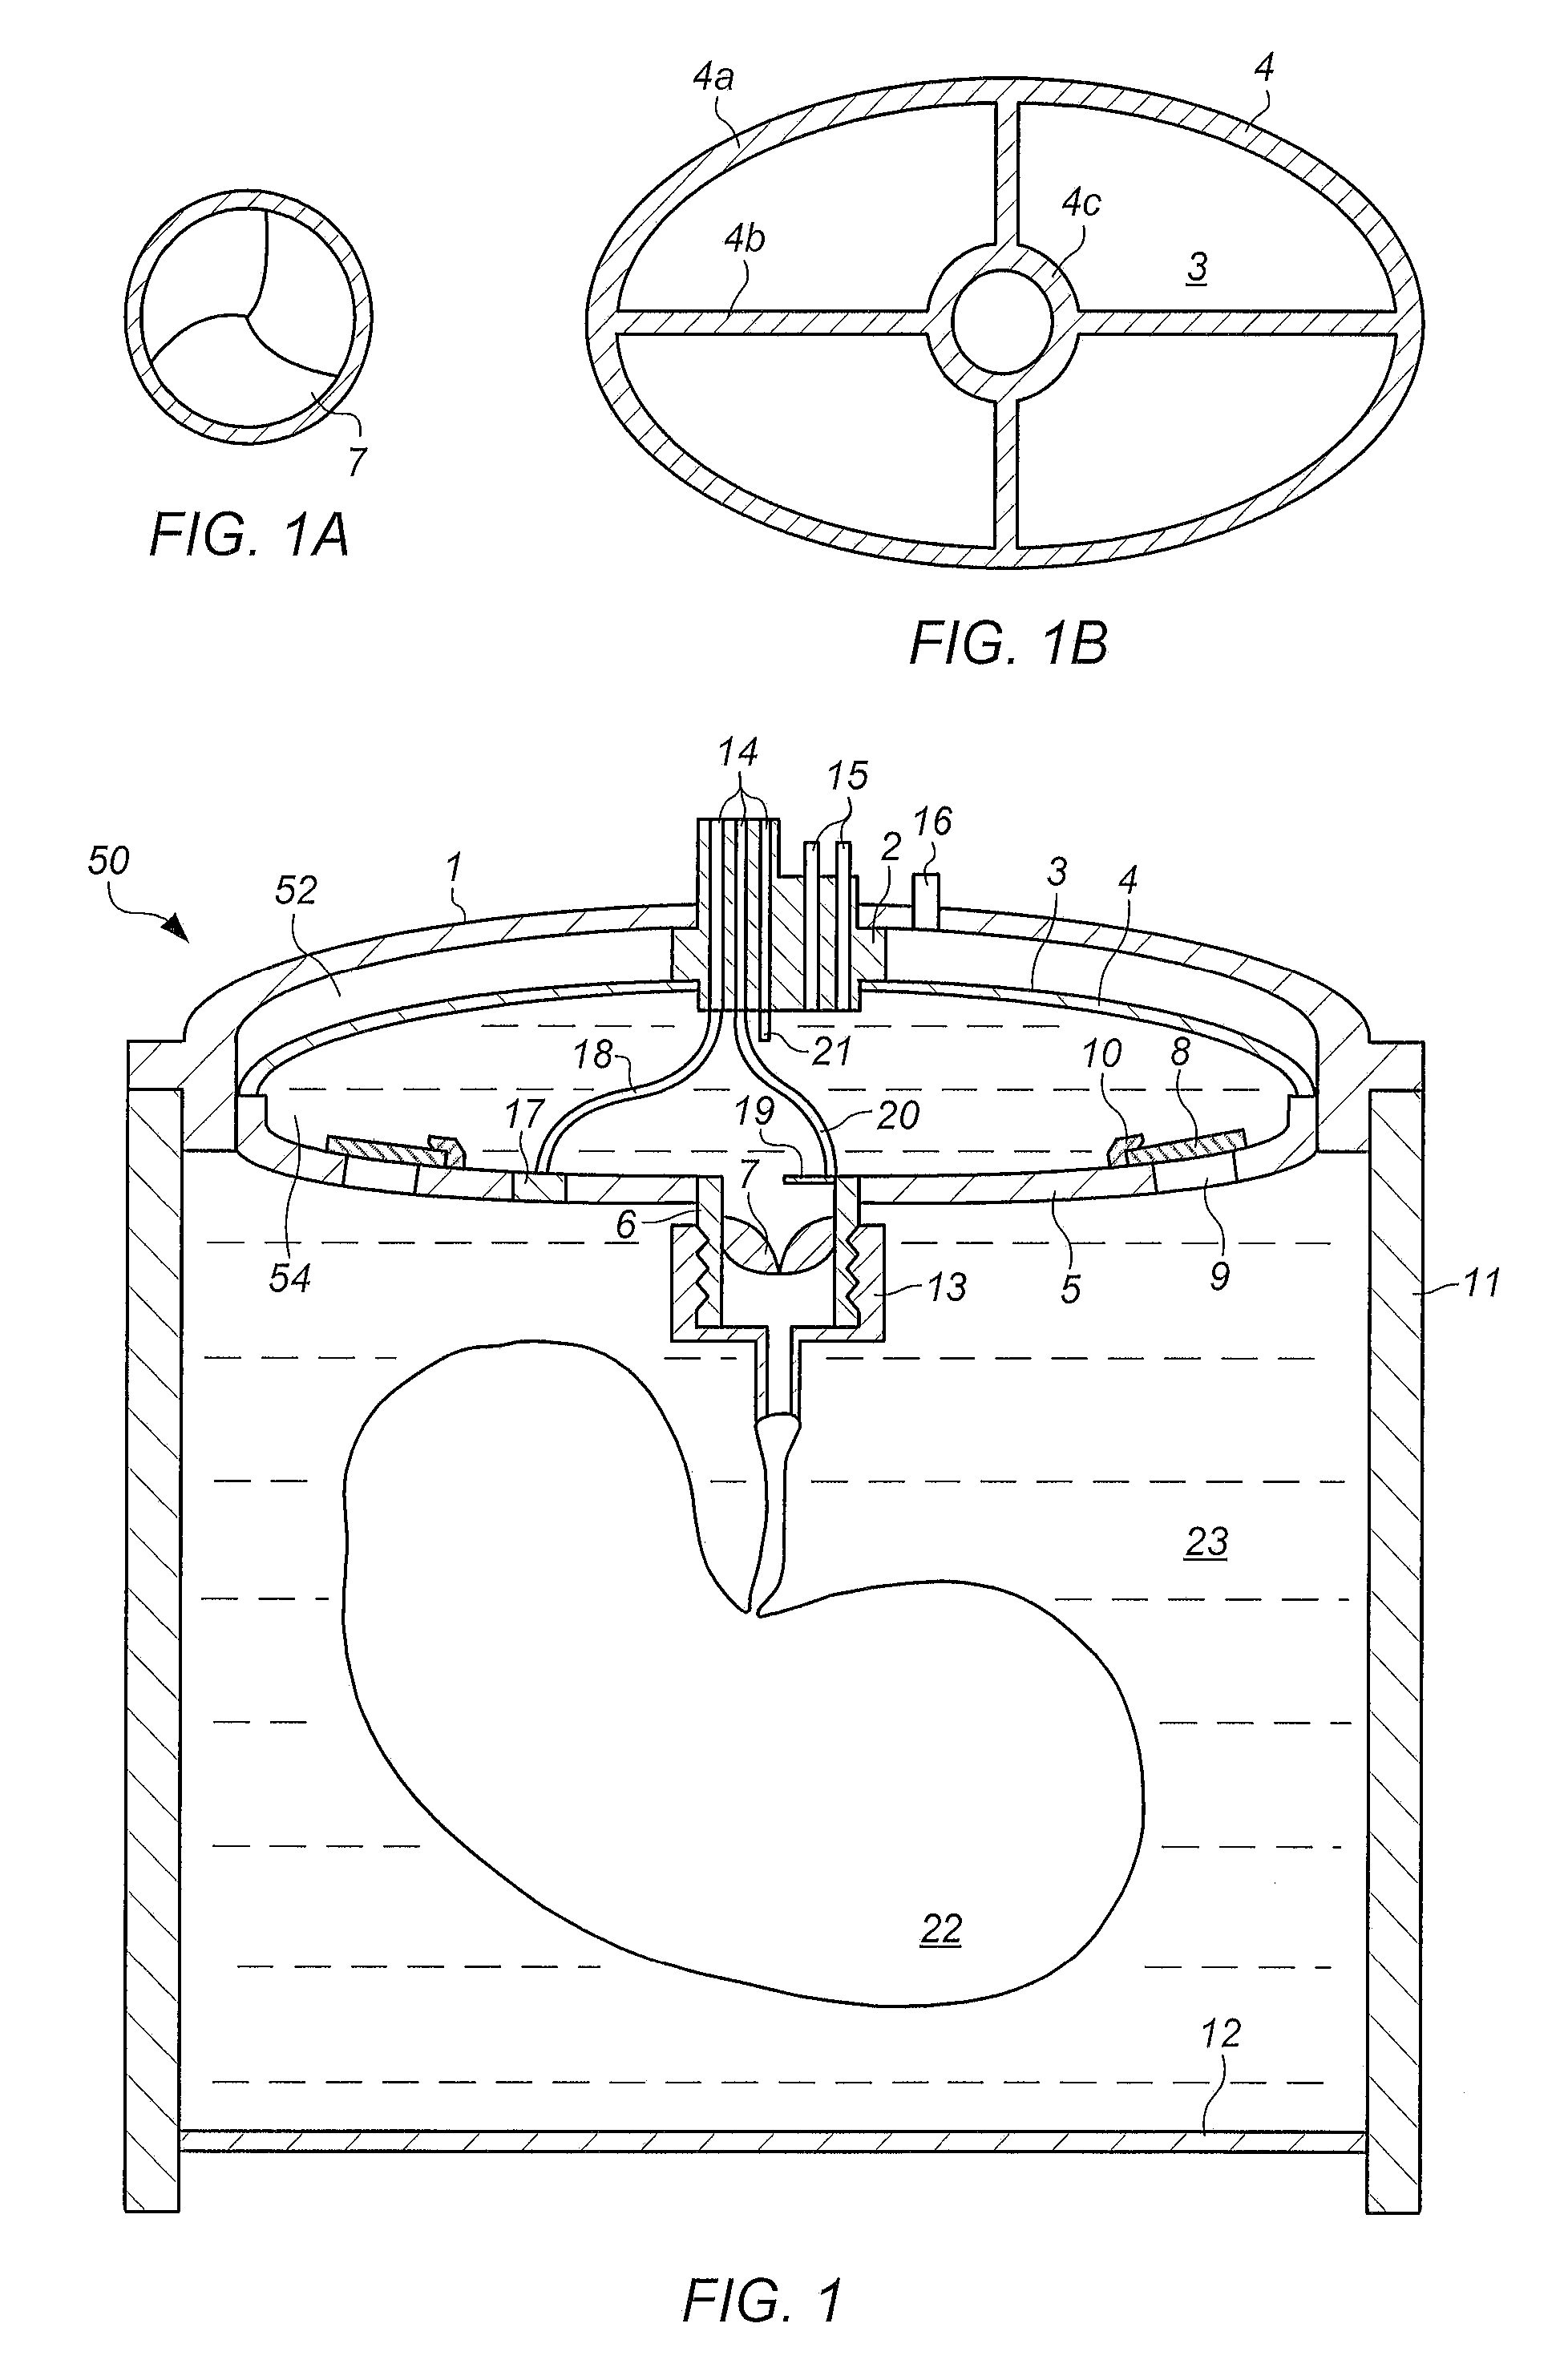 Fluidics based pulsatile perfusion preservation device and method